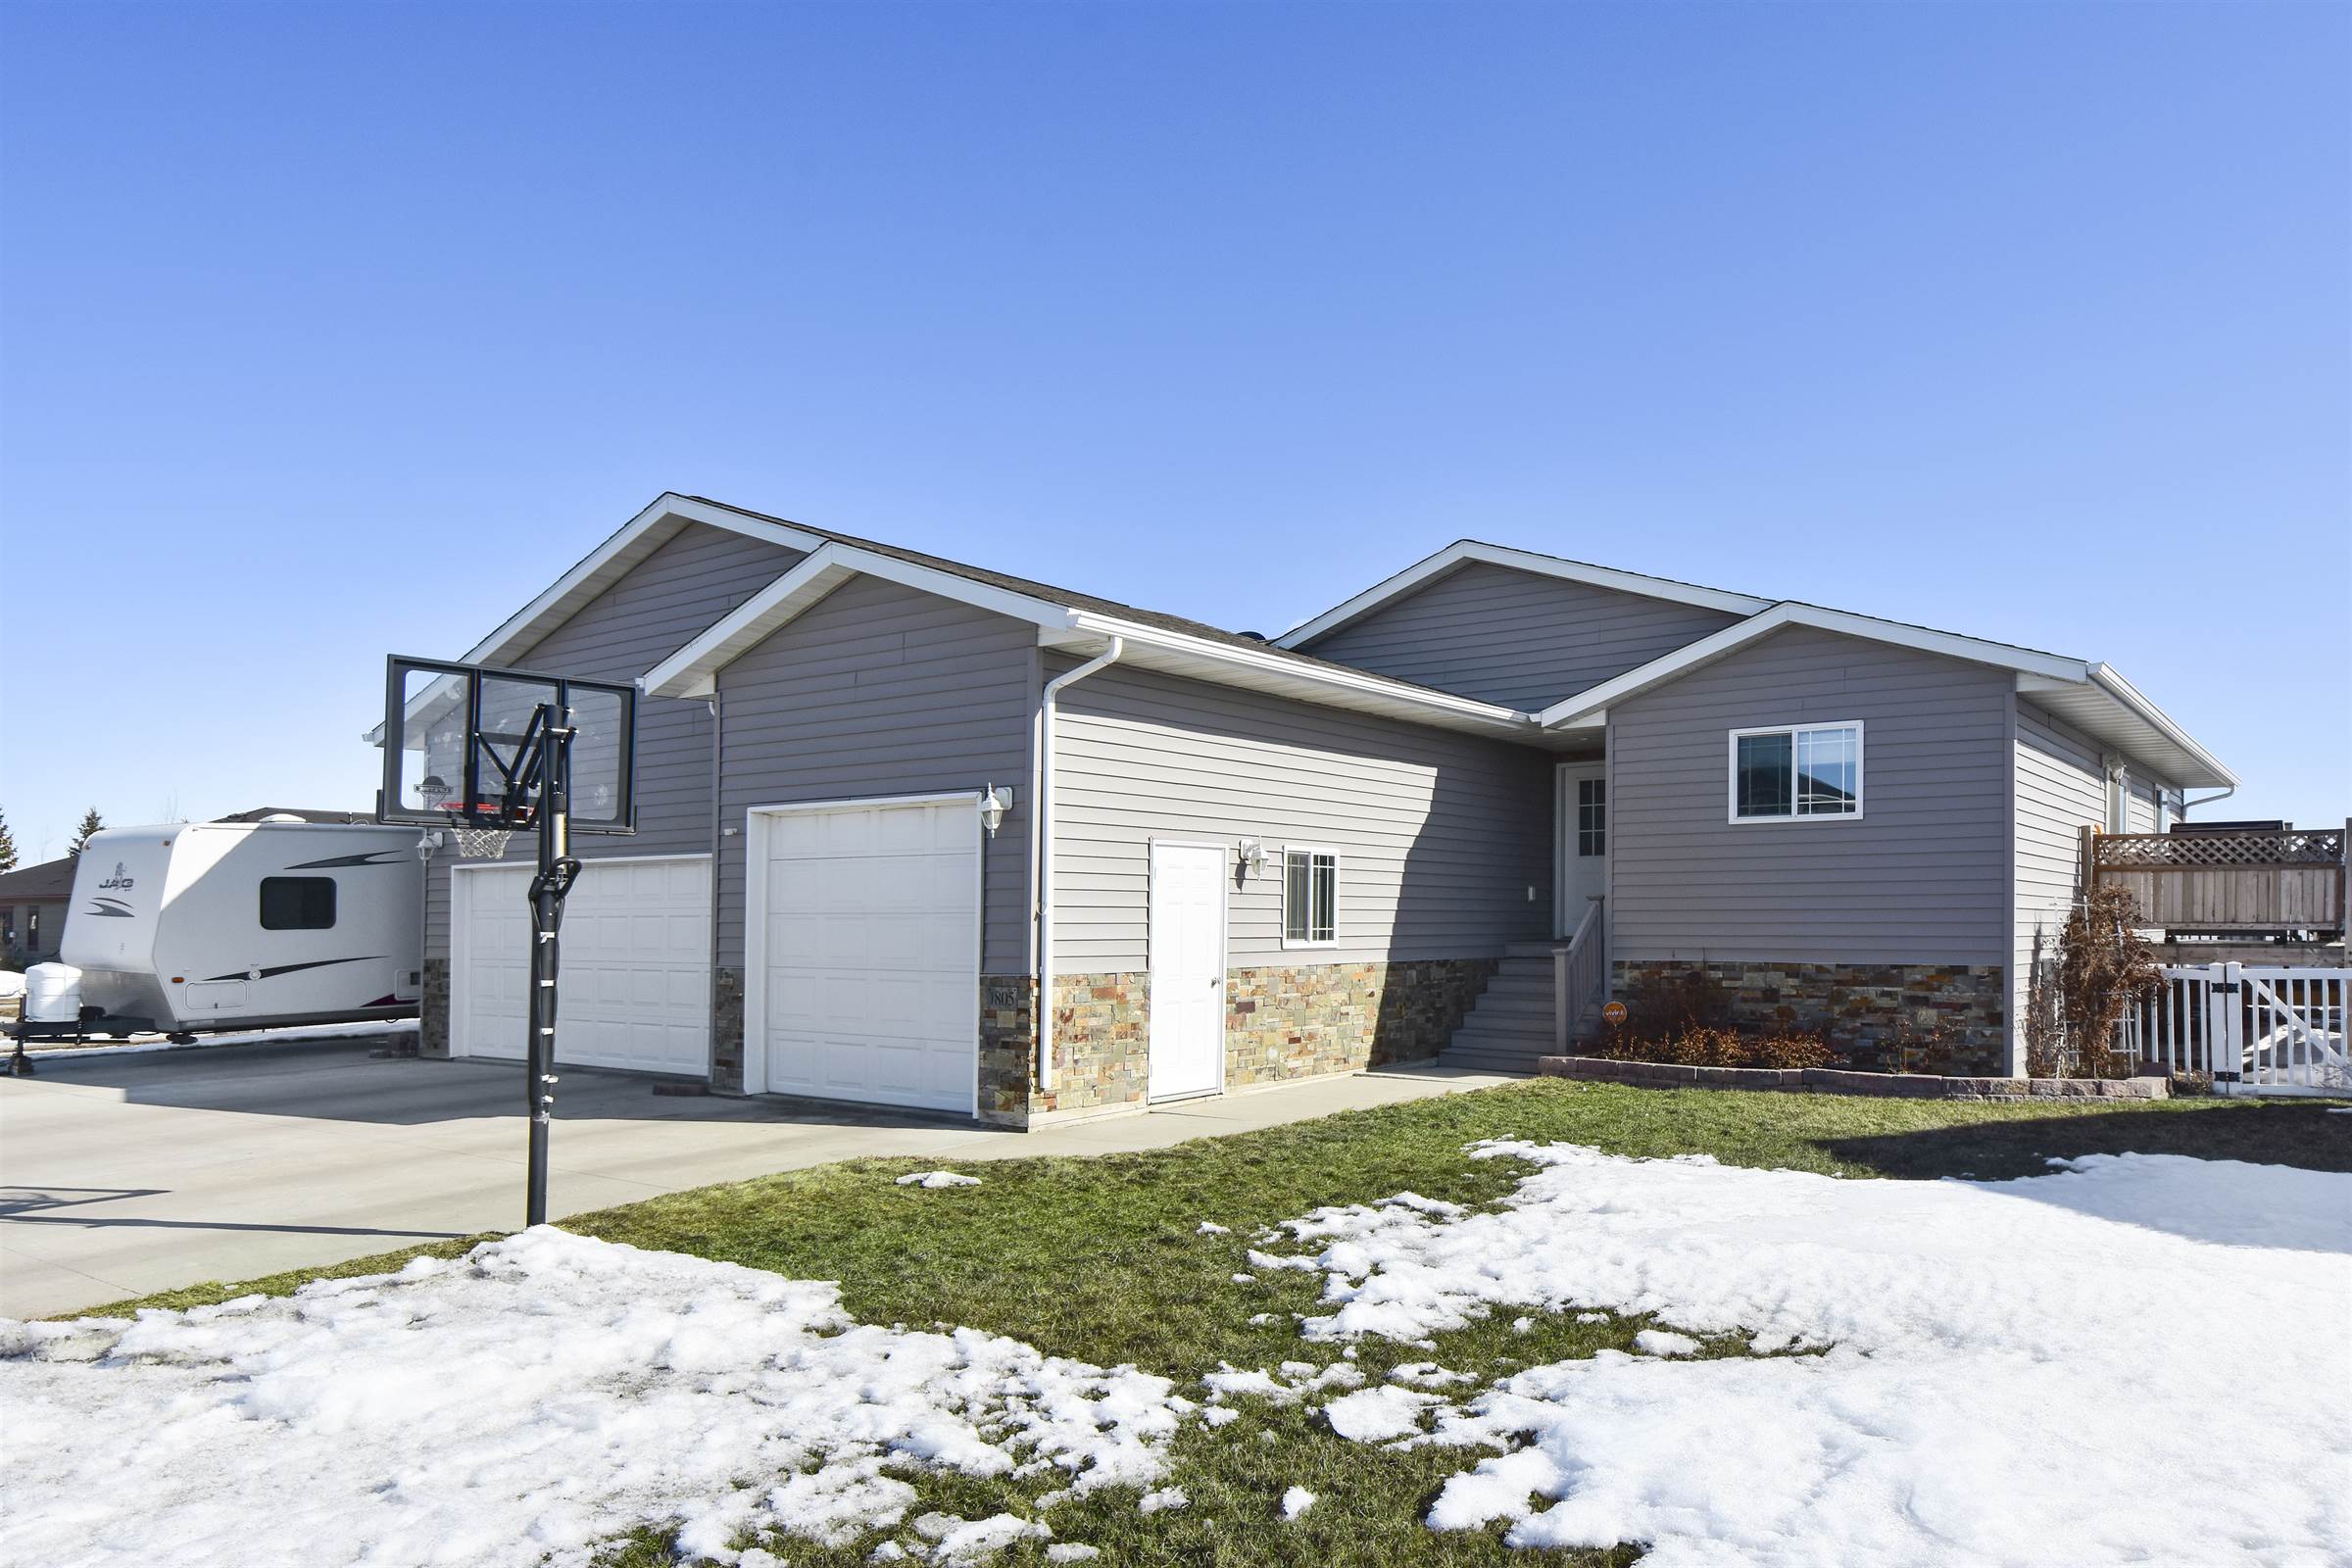 1805 26th St SW, Minot, ND 58701